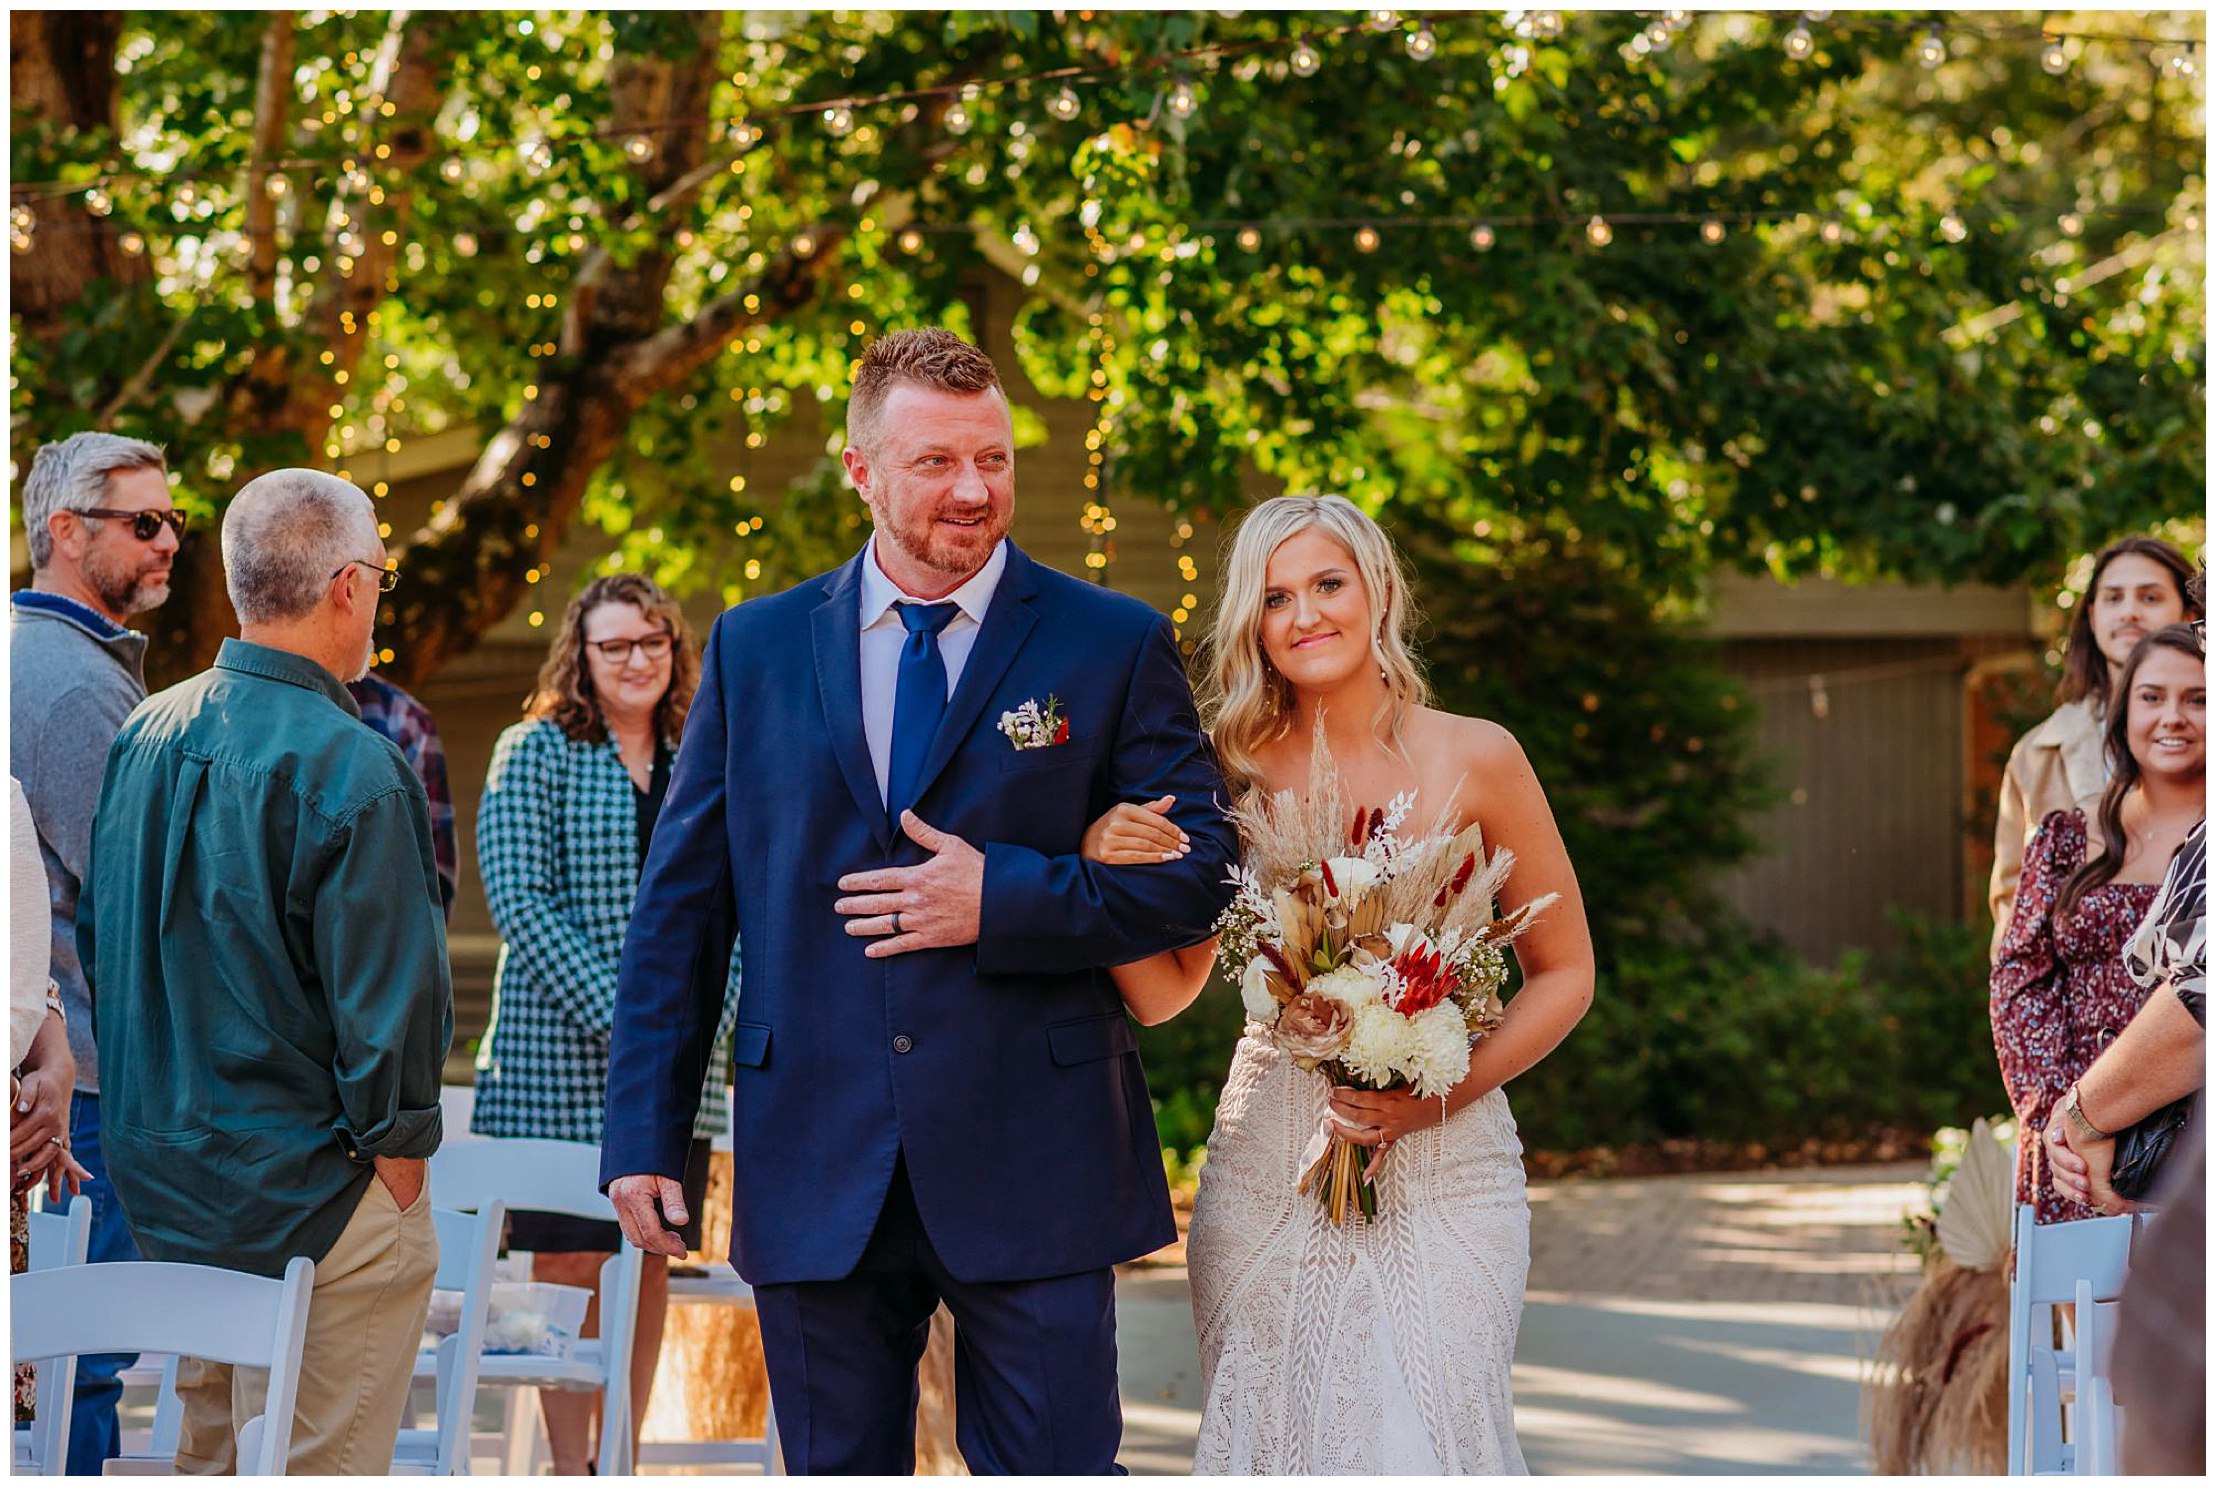 bride and her dad walking down the aisle at a wedding ceremony with smiling guests